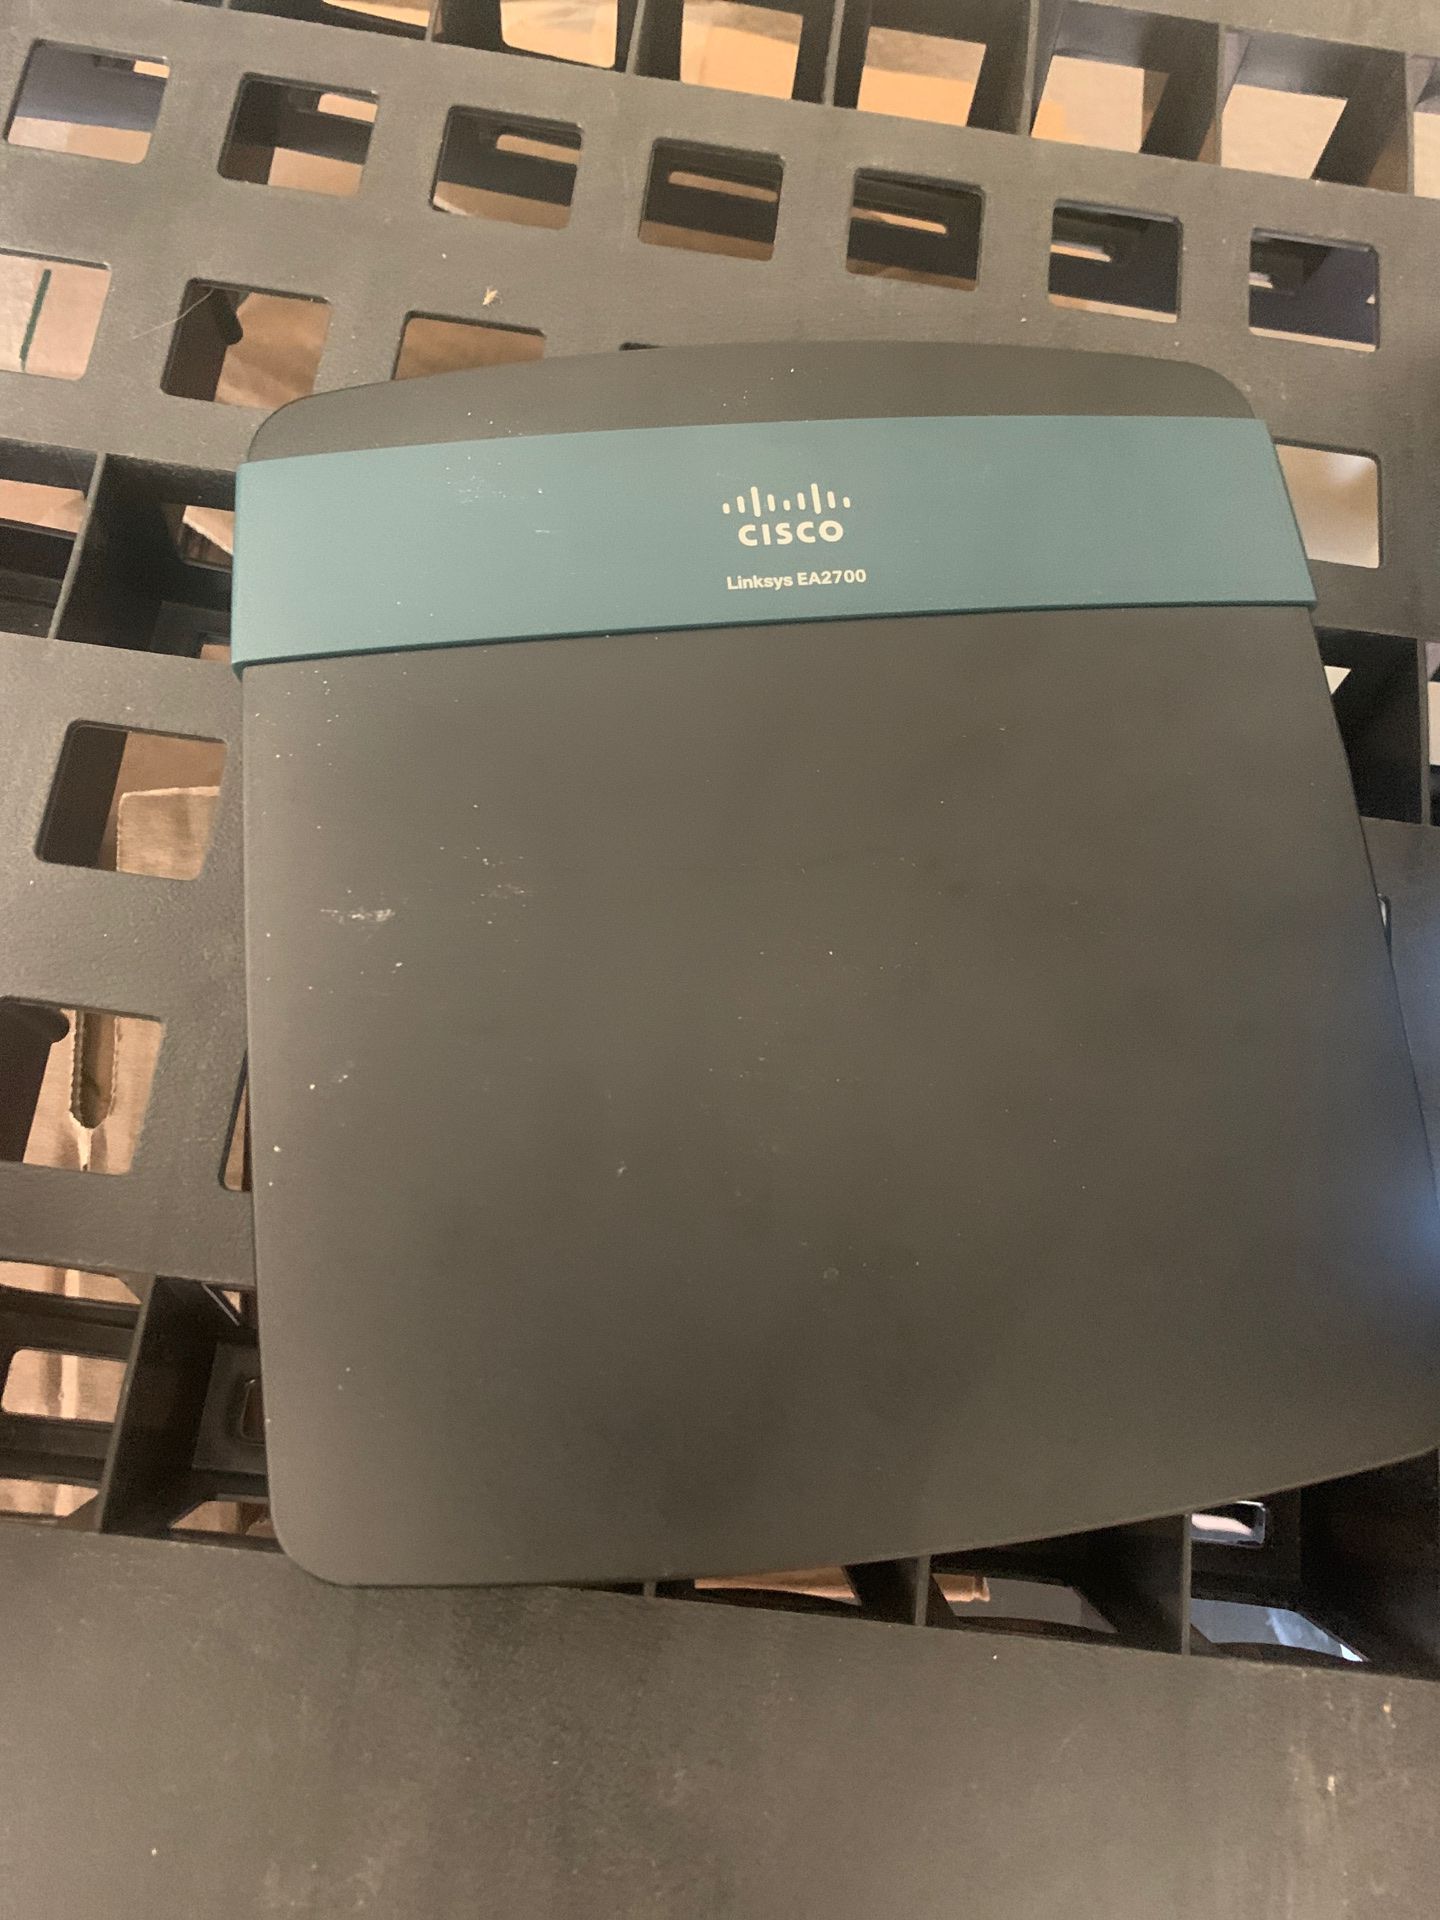 WiFi Linksys router